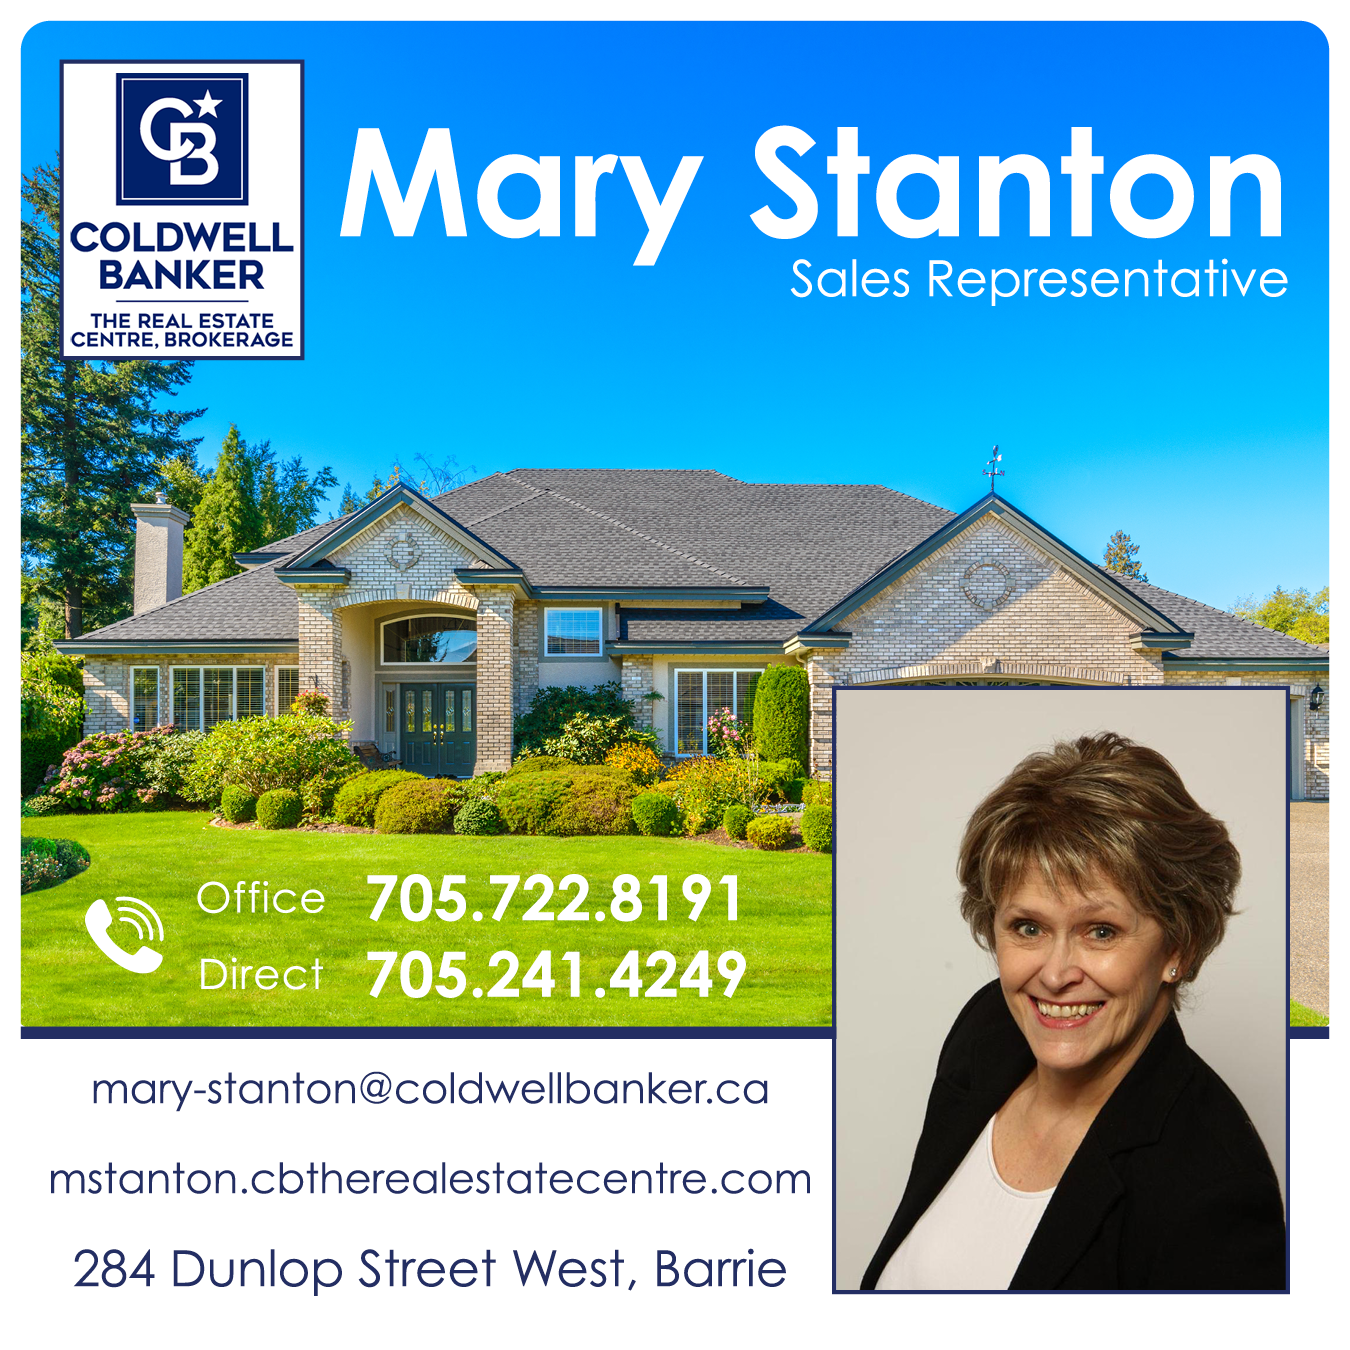 Mary Stanton Coldwell Banker